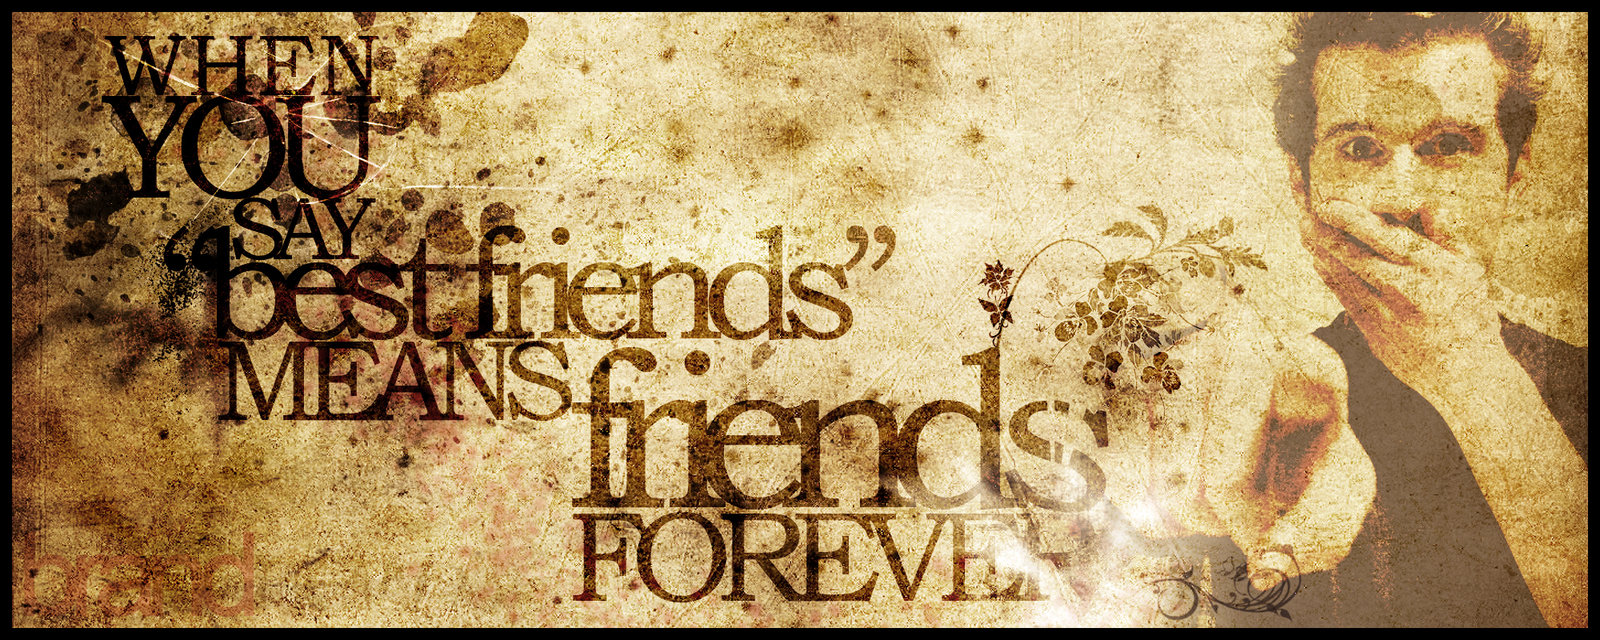  Sweet Friendship Day Wish You very Happy Friendship Day Wallpapers